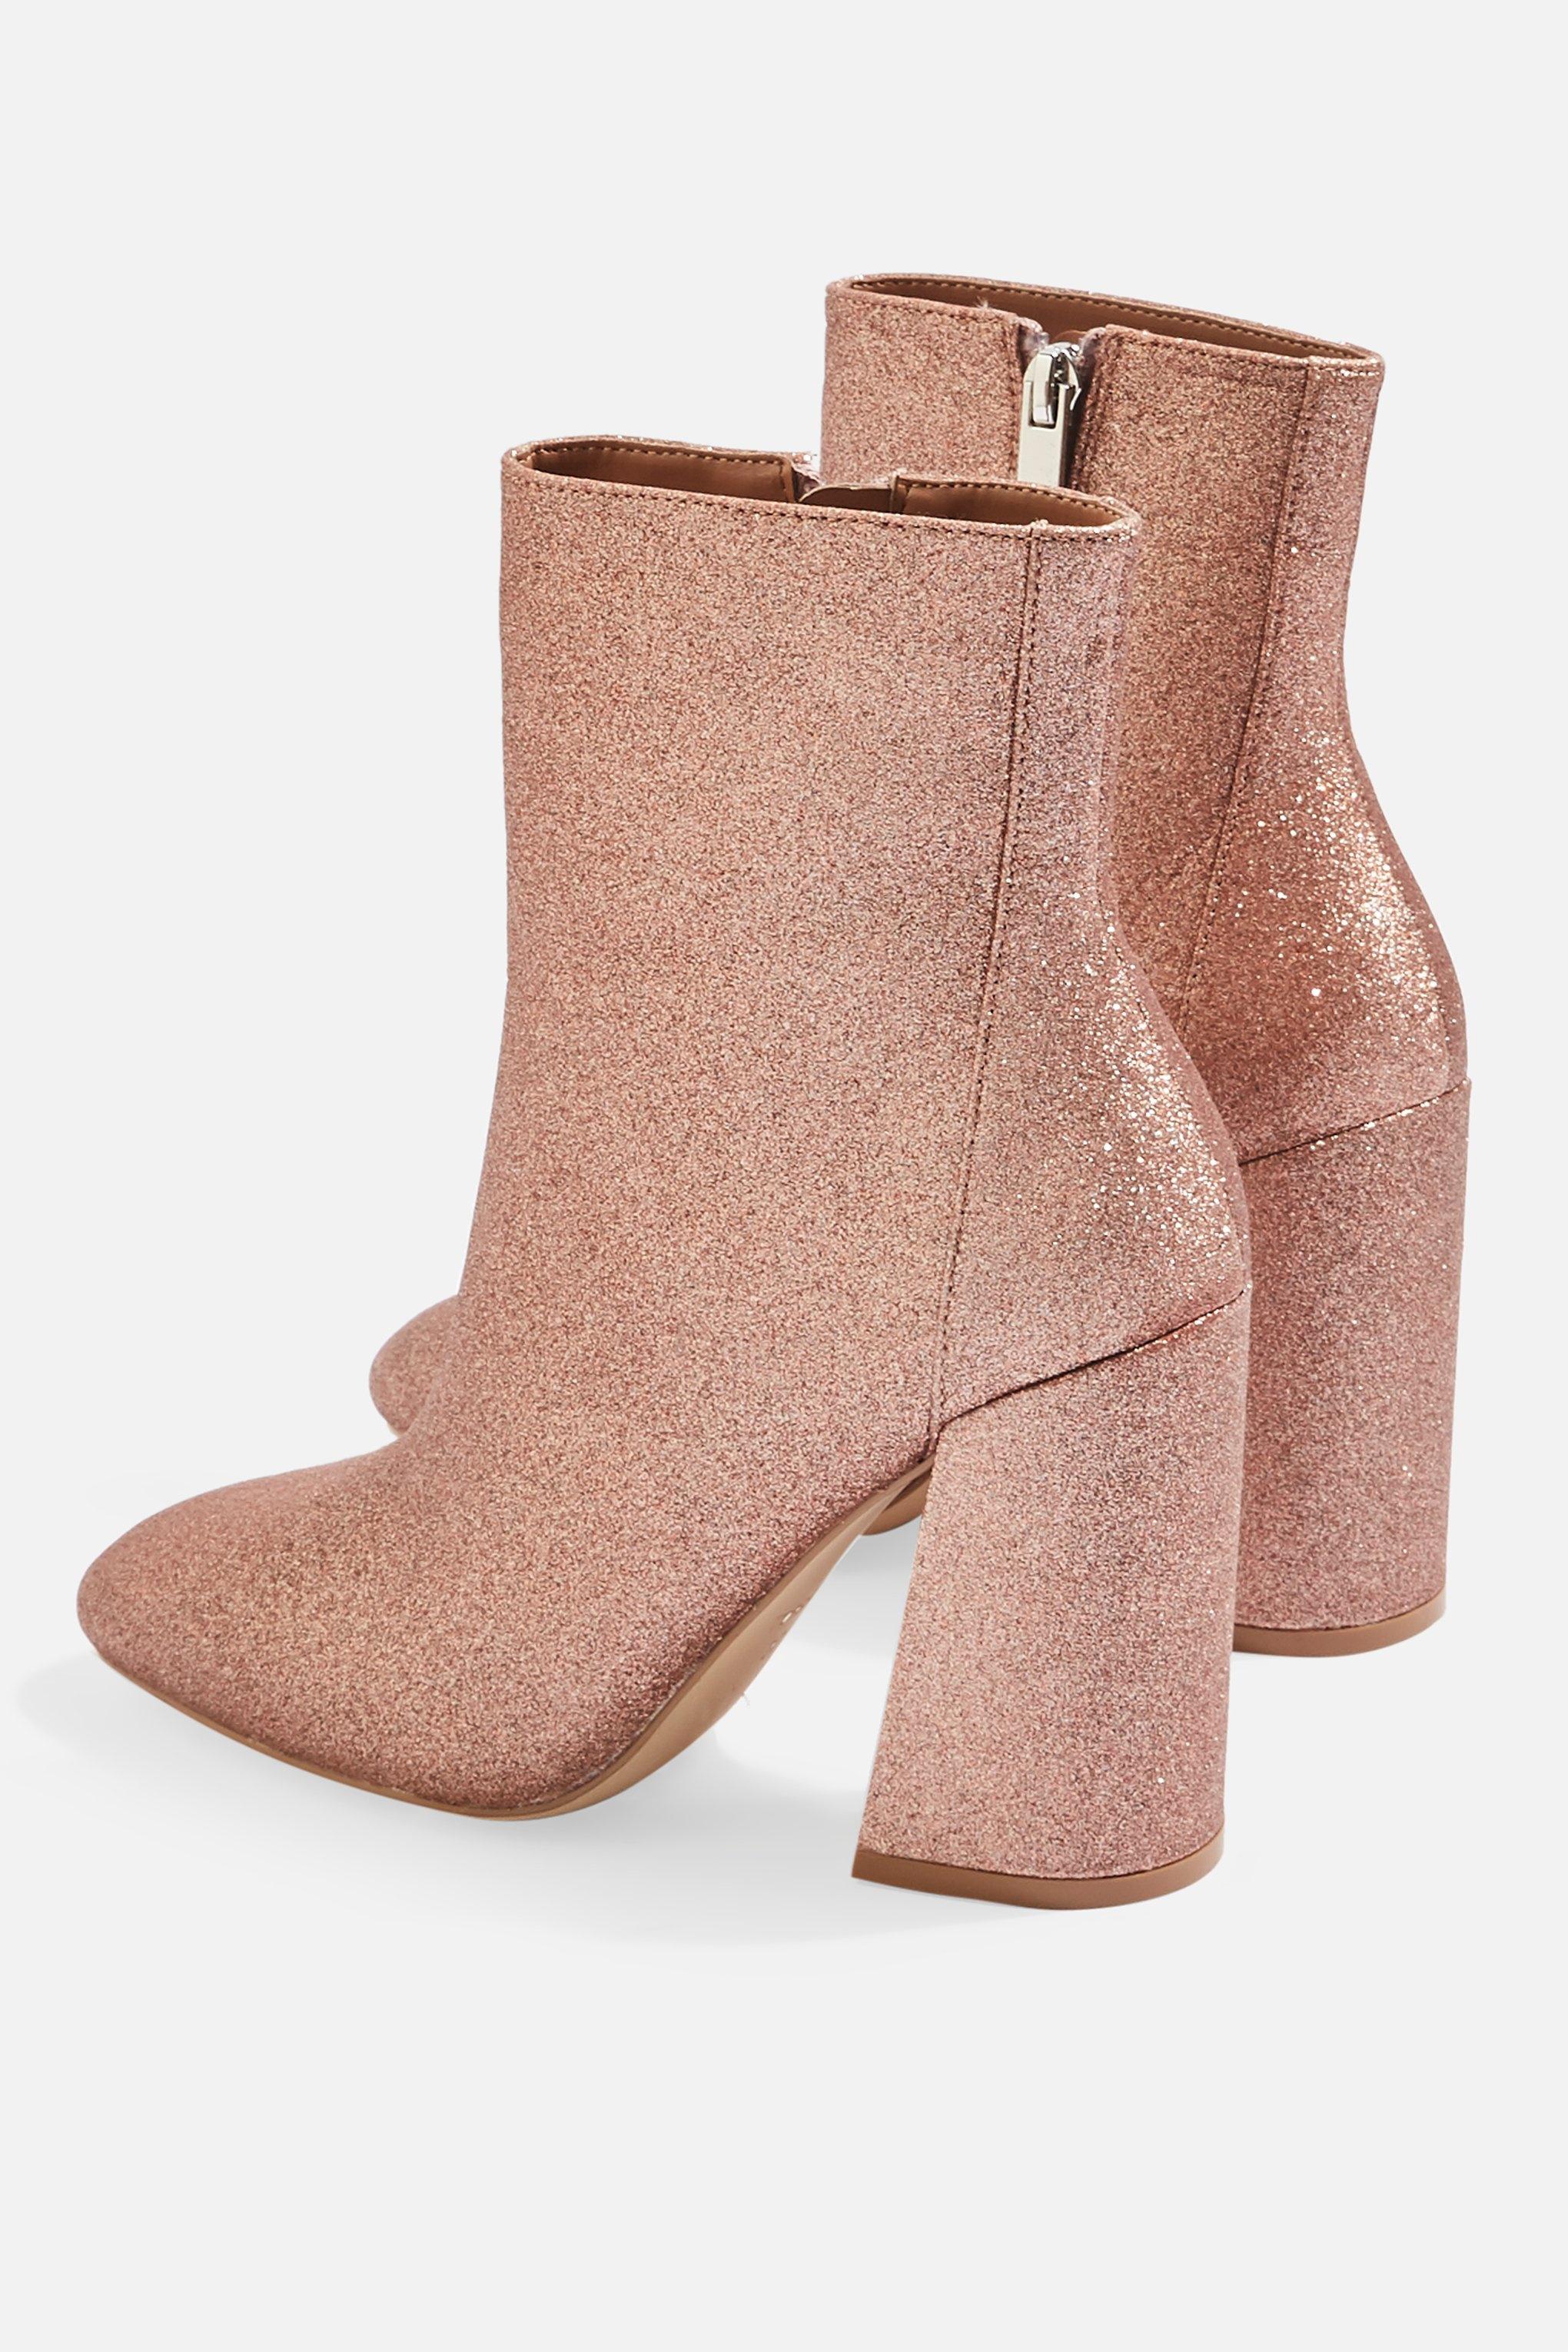 TOPSHOP Synthetic Bling Glitter Boots in Pink - Lyst